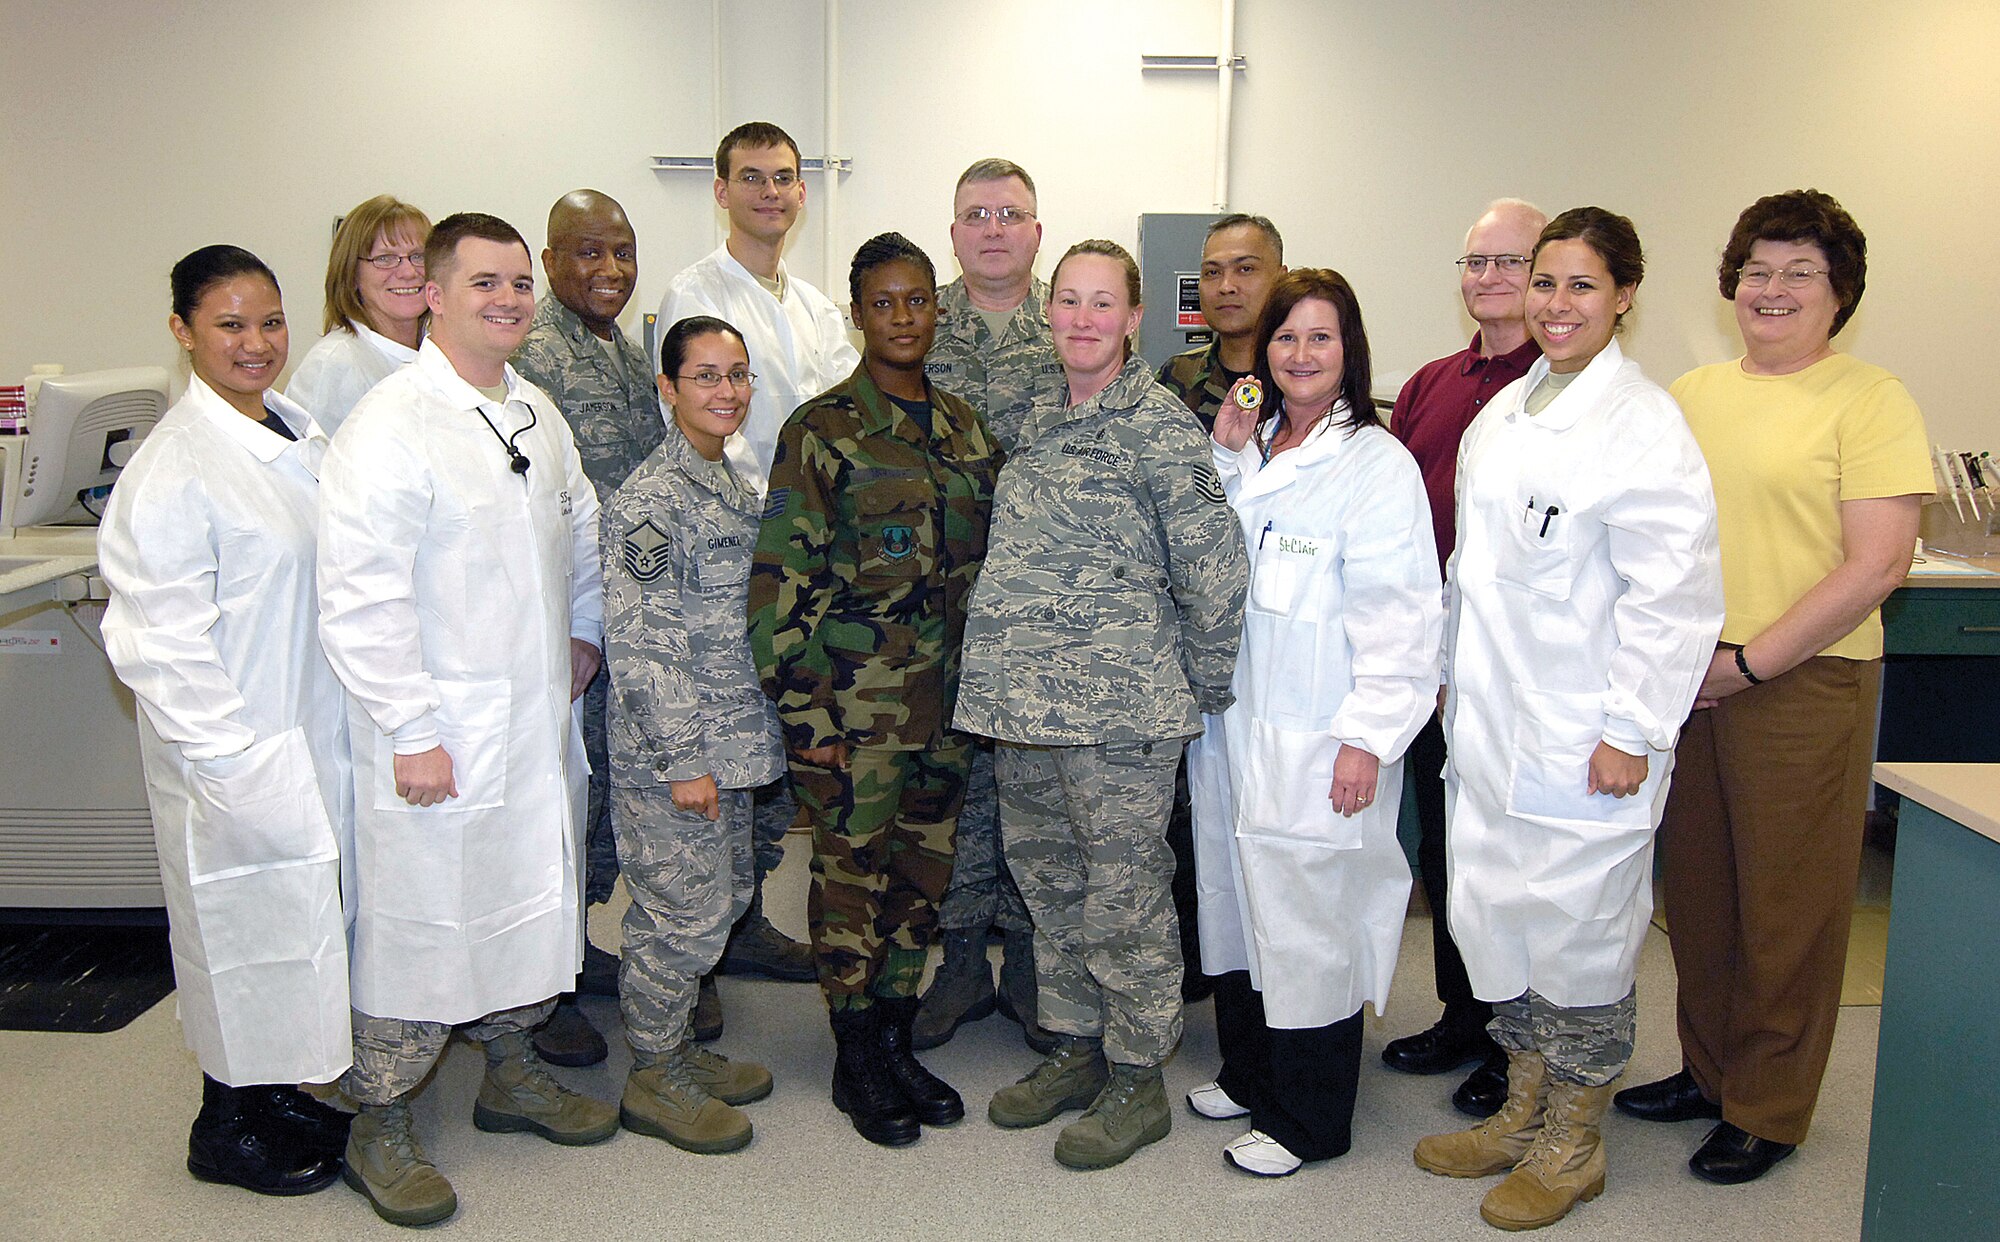 The College of American pathologists recently visited the Tinker Clinic’s lab for a no-notice inspection. The lab passed a checklist of 777 items with only two “minor” discrepancies. The lab was recognized with commander’s coins from the 72nd Air Base Wing commander, Col. Allen Jamerson. Front Row (left to right):  Staff Sgt. Milette Palanca, Staff Sgt. Maurice McDaniel, Master Sgt. Carol Gimenez, Tech. Sgt. Avri McKnight, Tech. Sgt. Crystal Spedding, Ms. Elizabeth St Clair, Staff Sgt. Rebecca Miller. Back Row (left to right):  Lori Cranford, Col. Allen Jamerson, Airman 1st Class Michael Johnson, Maj. Marcus Jimmerson, Maj. Lorenzo Gabiola, Richard Scott and Sue Kuritz.(Air Force photo/Margo Wright)